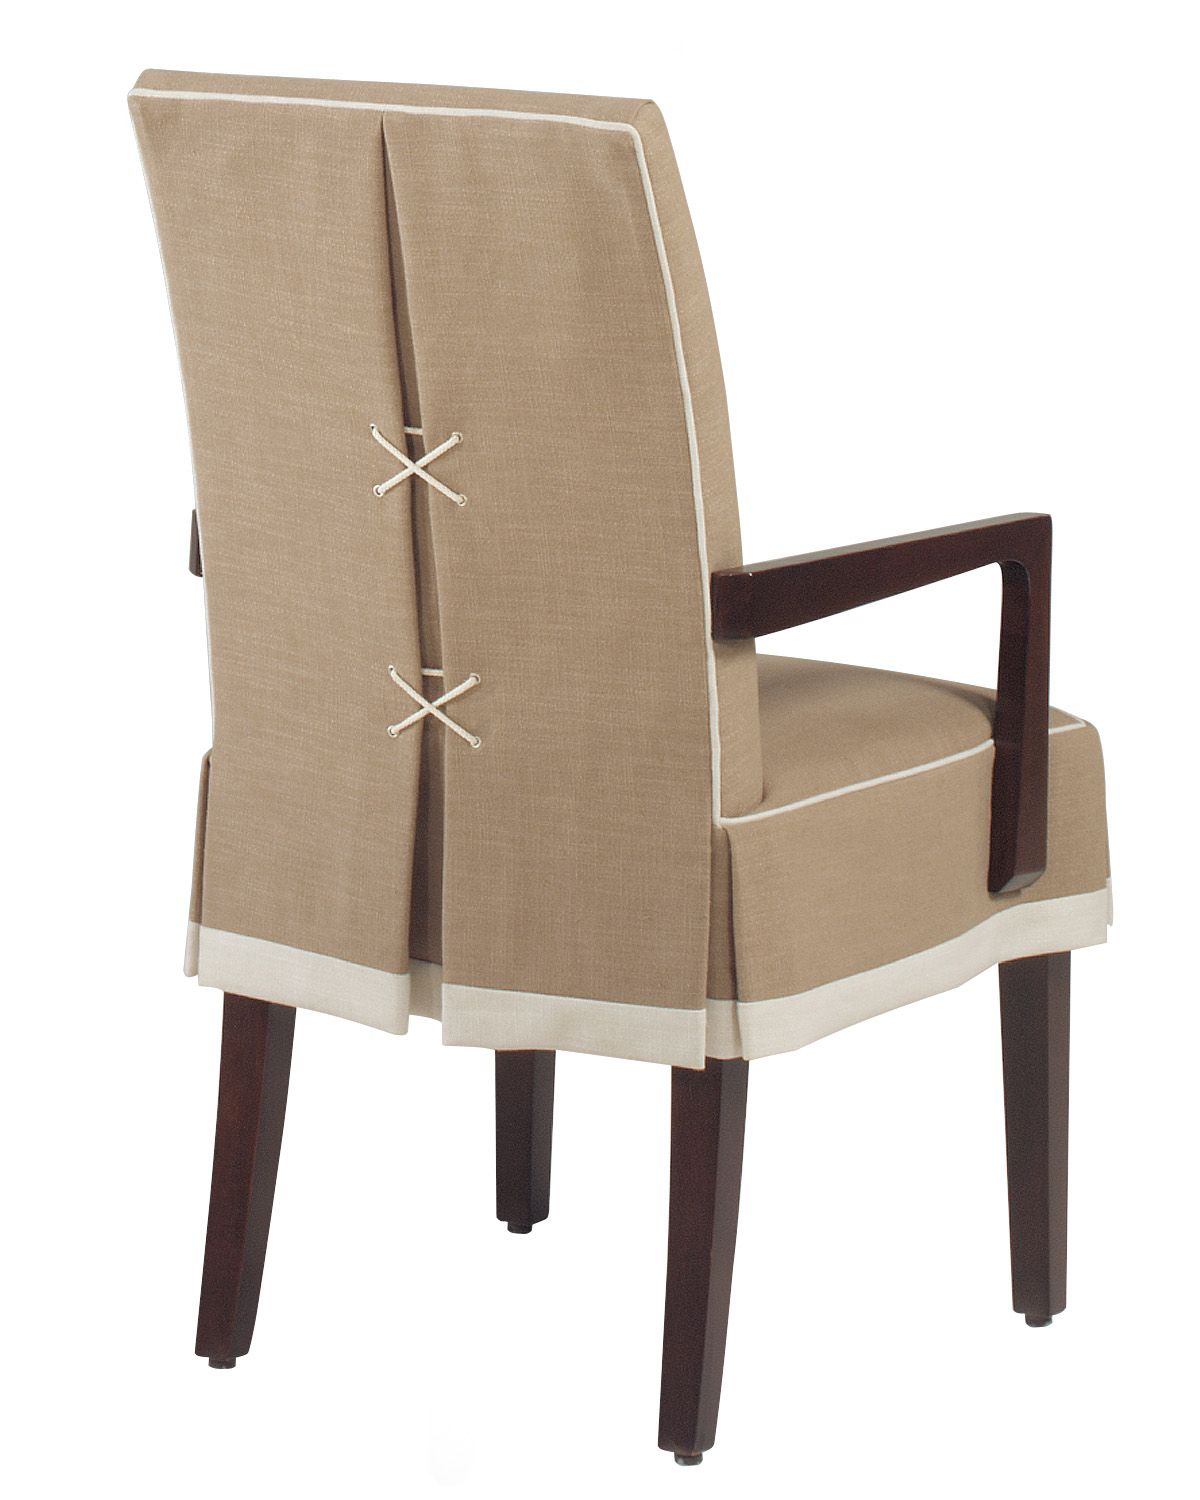 Dining Room Chairs With Arms Covers In 2020 Slipcovers For within proportions 1200 X 1500